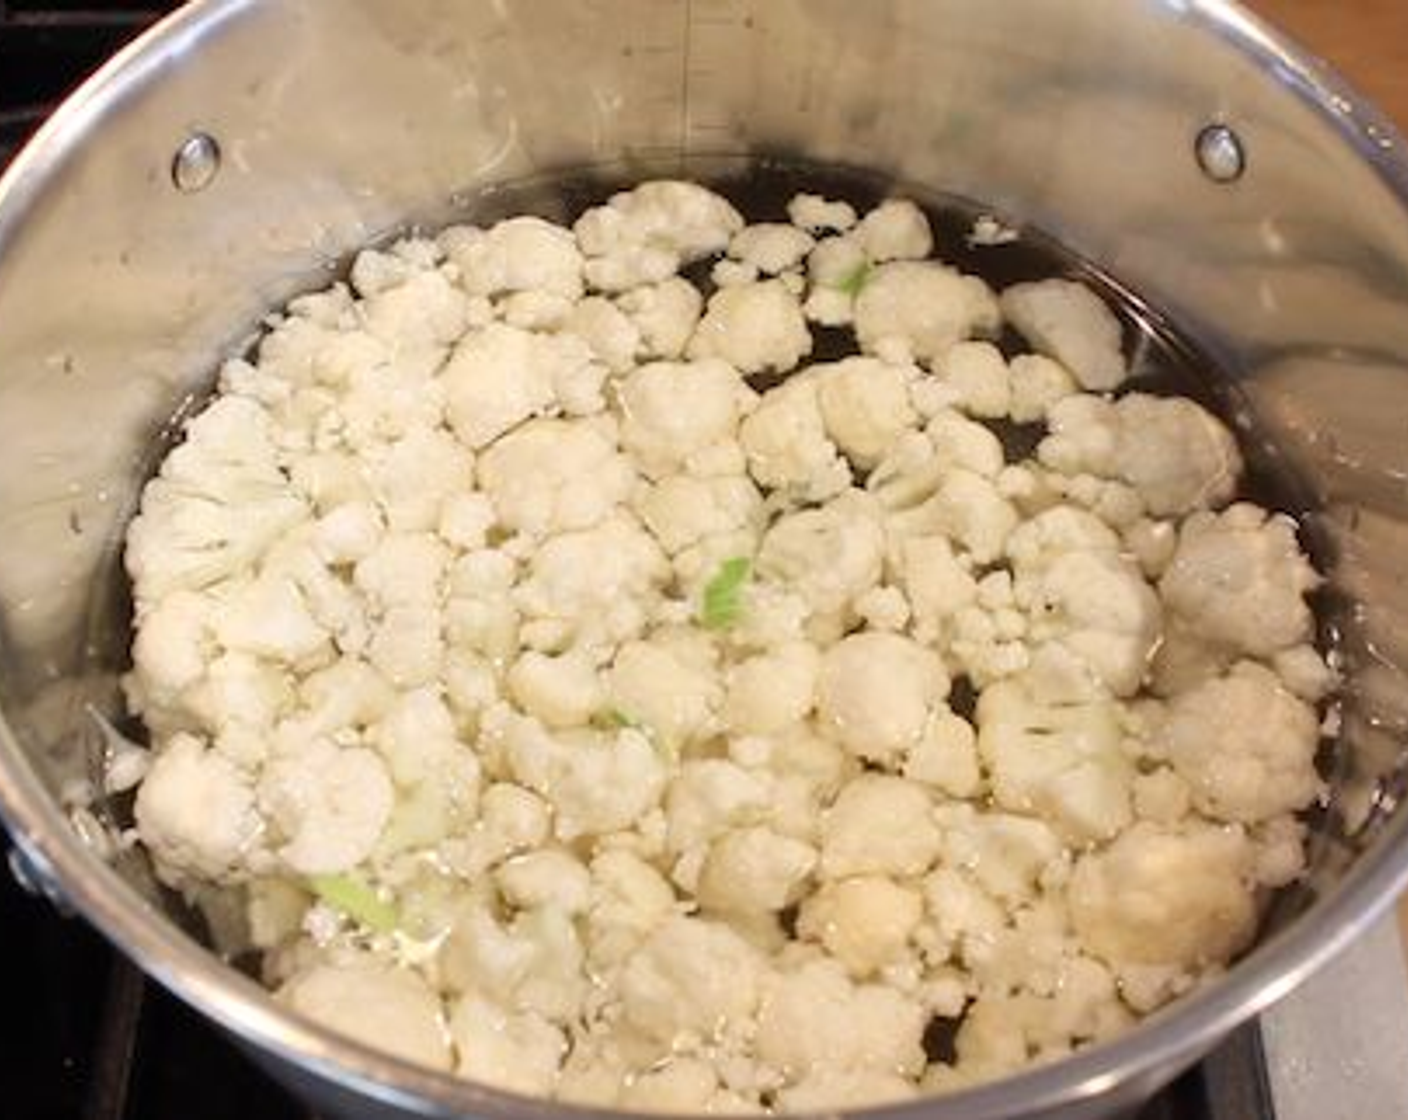 step 2 While the bacon is cooking, into a pot with boiling Water (4 cups) with Salt (1 tsp) add in your Cauliflower (1 head). Cook it until just tender, don’t overcook otherwise they get waterlogged and mushy.